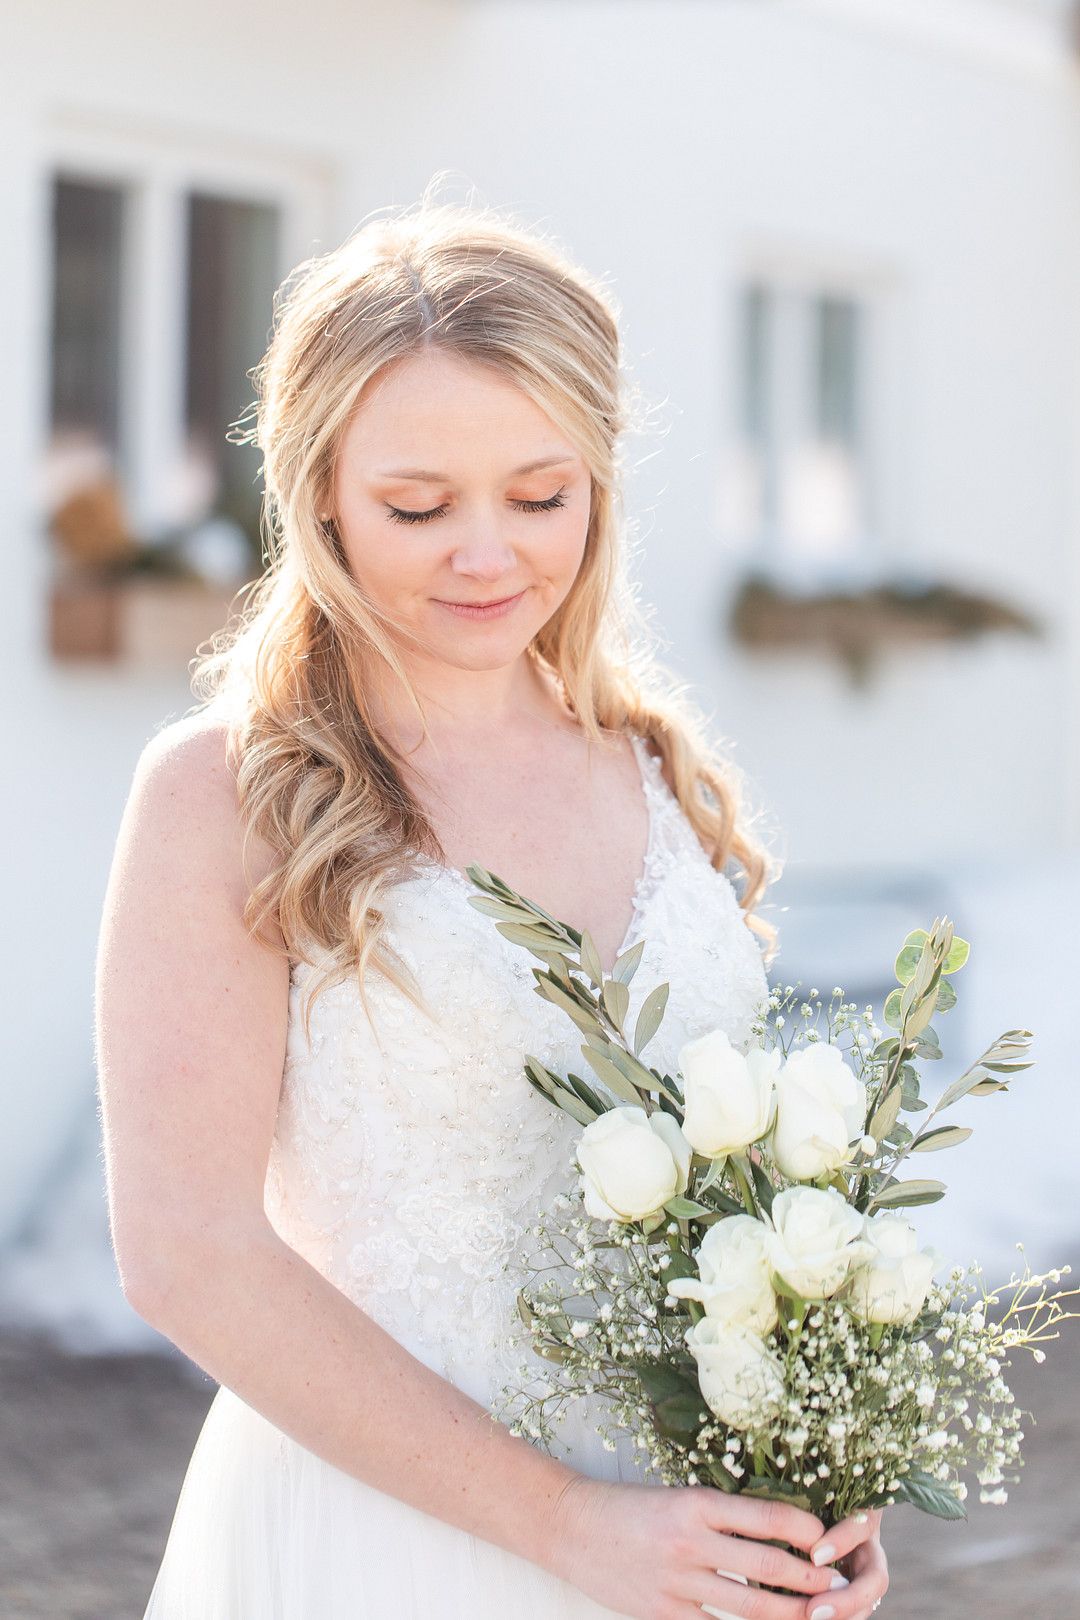 upclose image of bride holding flowers